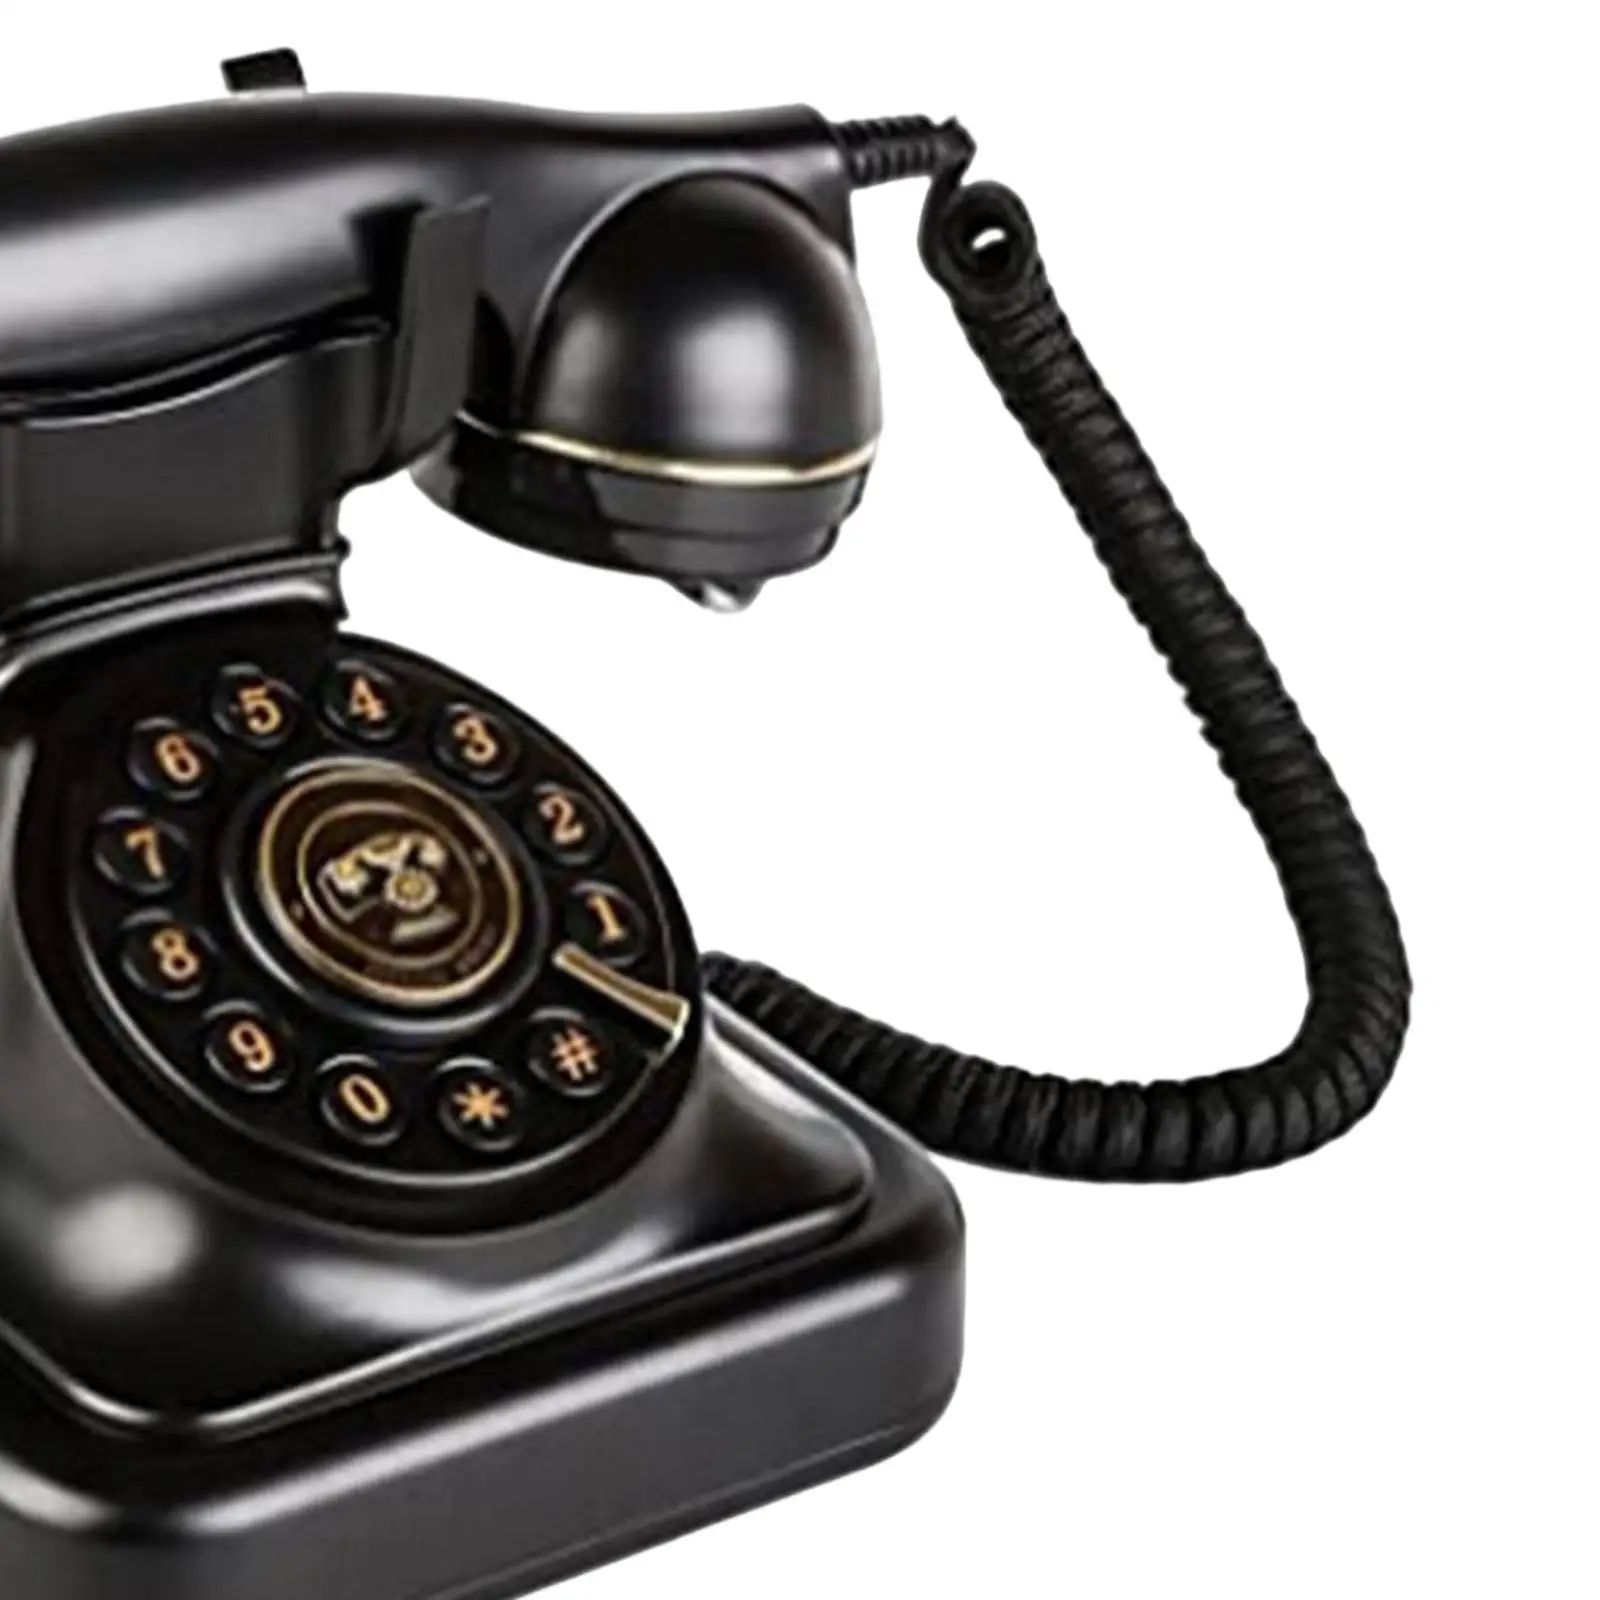 Retro Style Telephone Old Fashion Landline Phones Button Dialing with Adjust Volume Function Classic Home Phone for Desk Decor